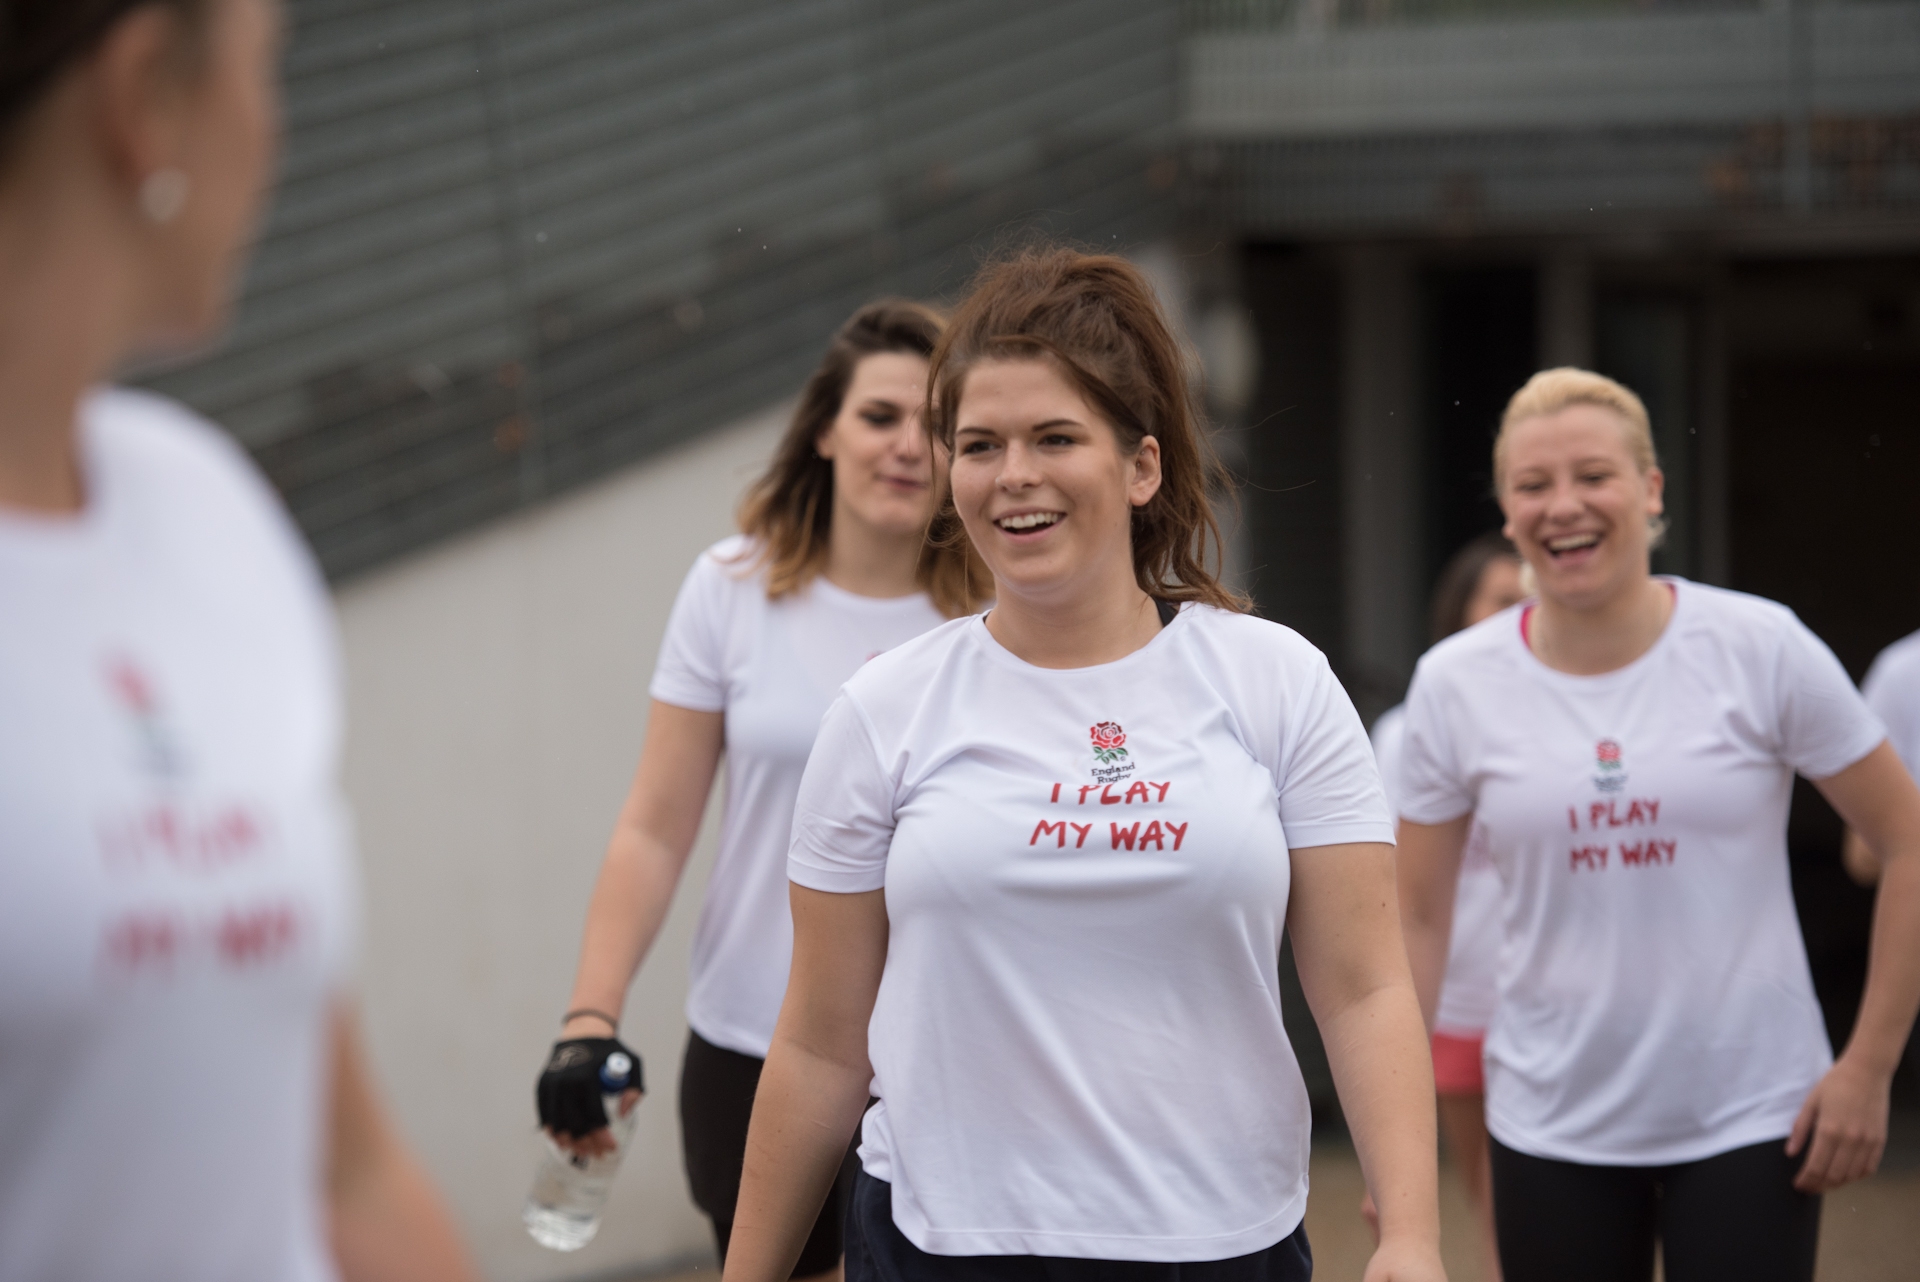 Women's Rugby Club Captain at LSE, Jess Davies leads the girls onto the pitch